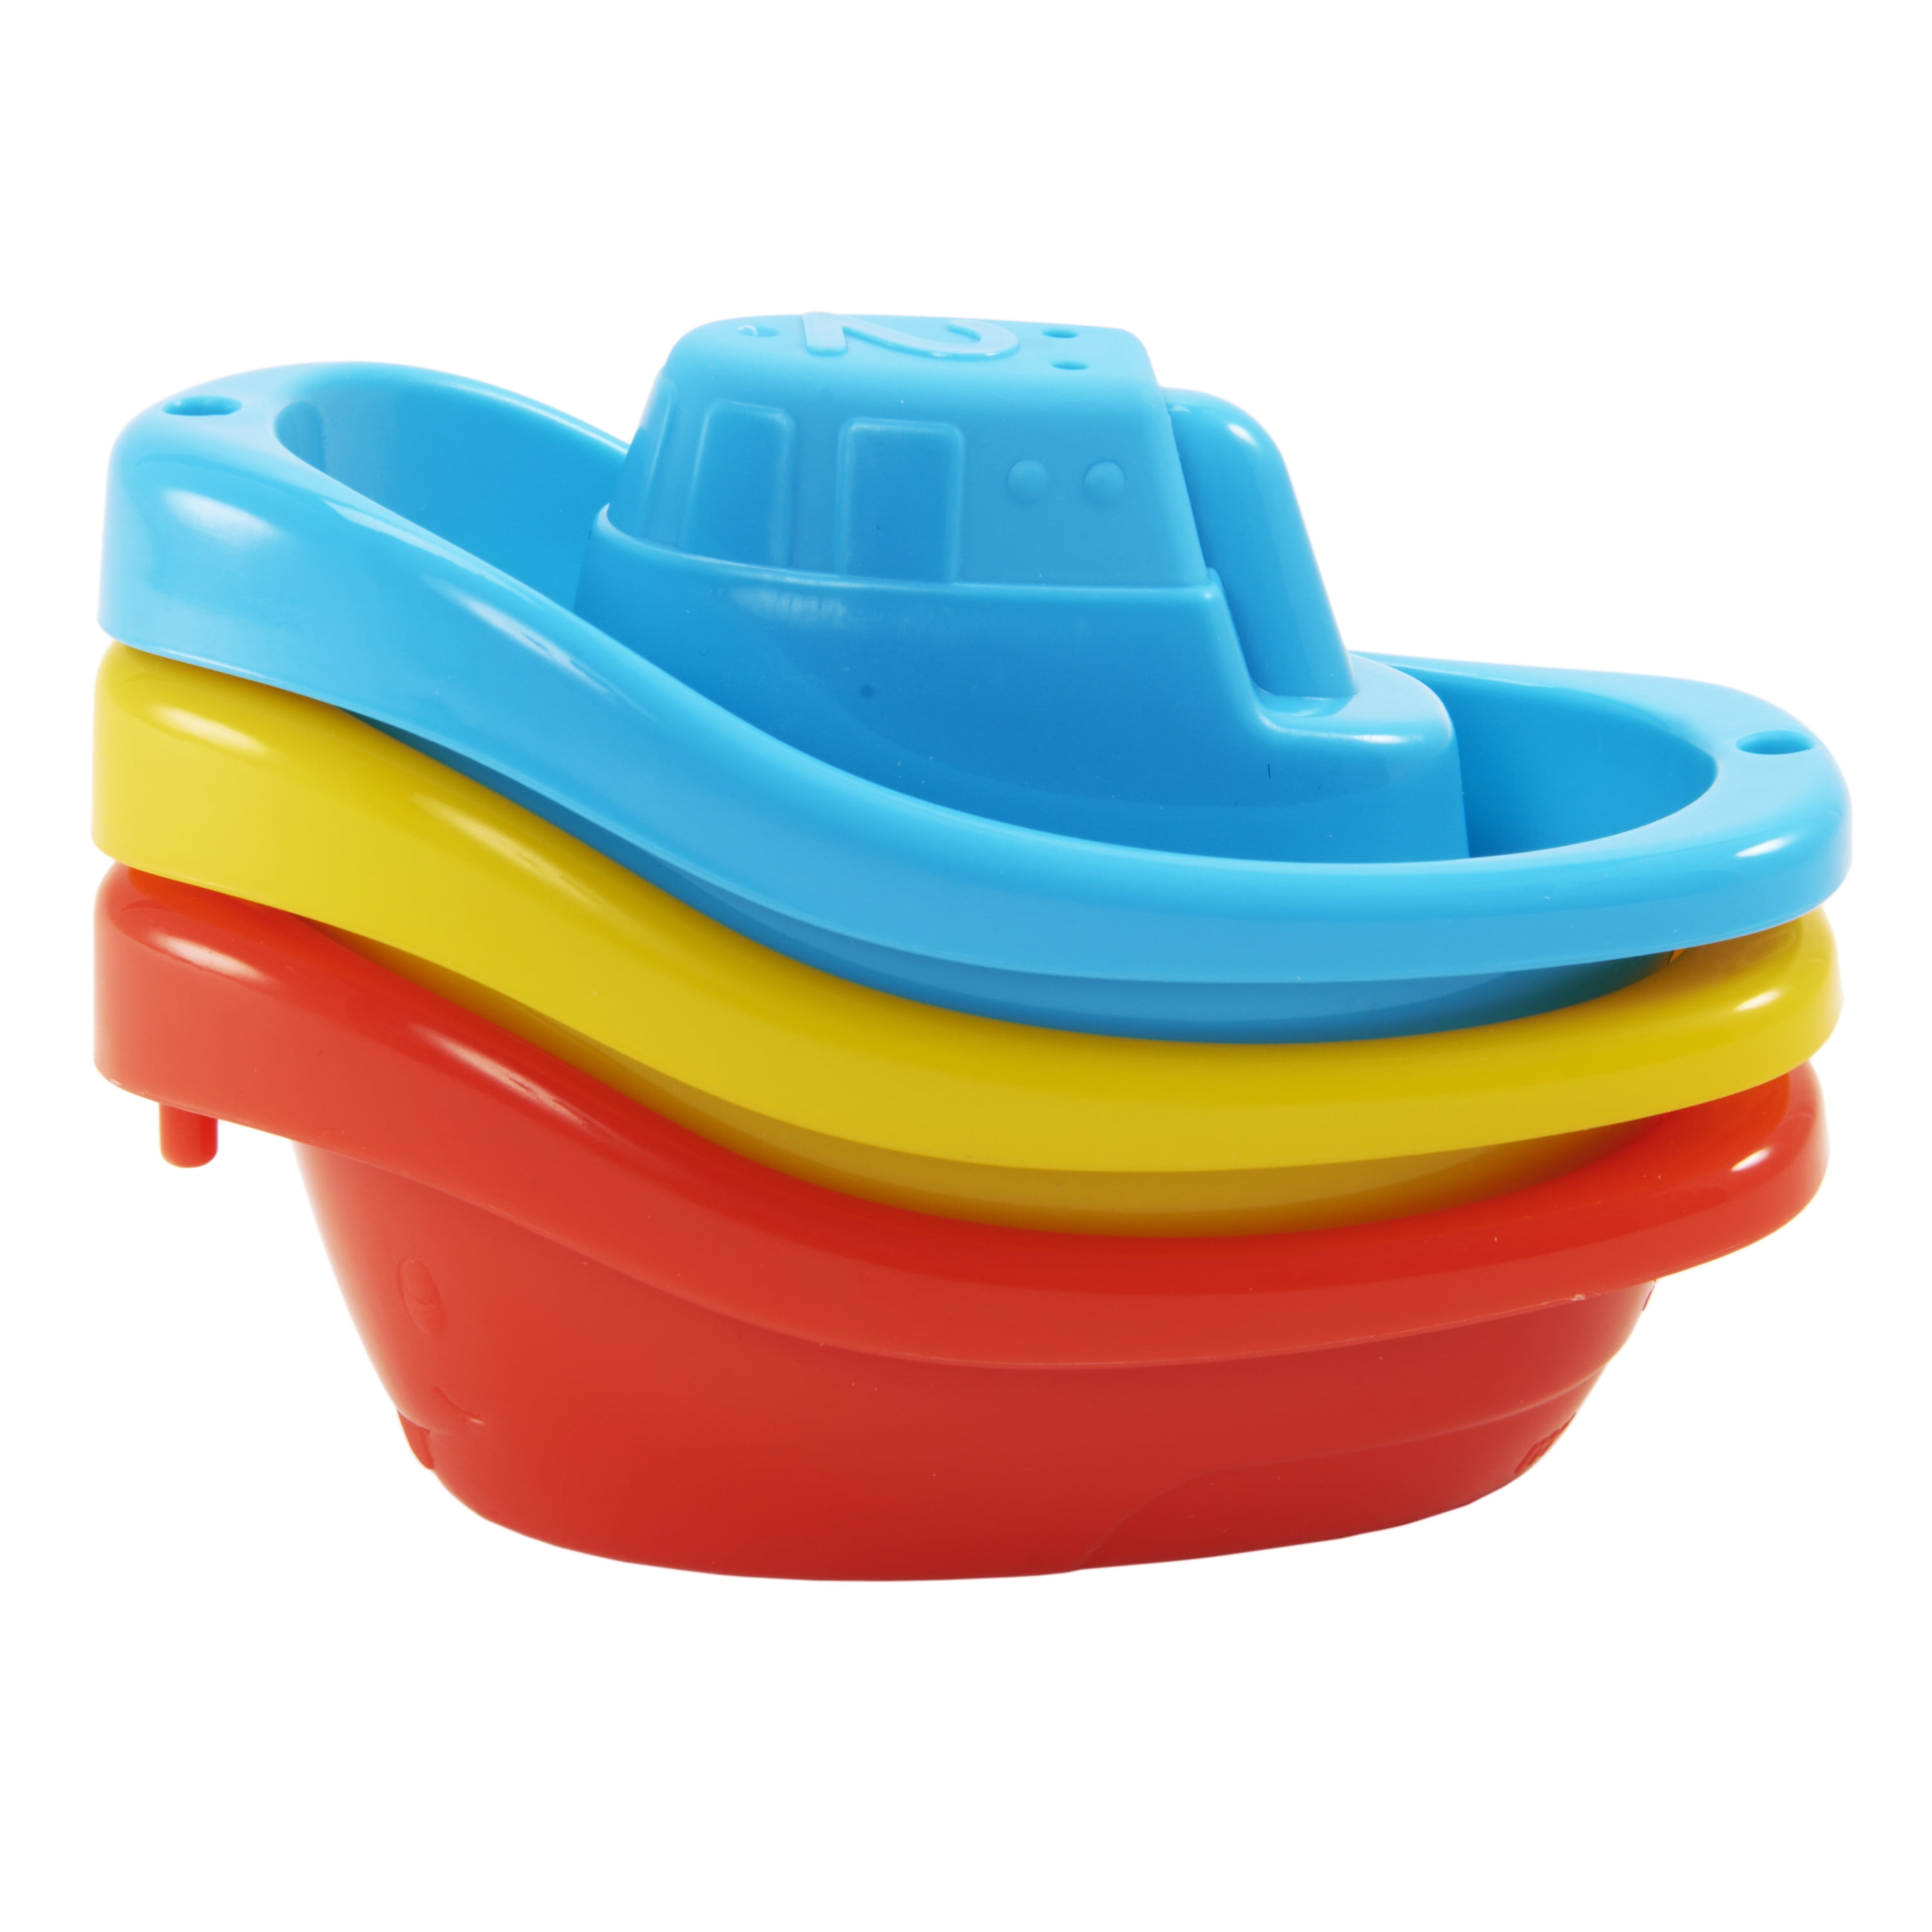 Childrens Boat Toy Baby Kids Children Fun Early learning Educational 